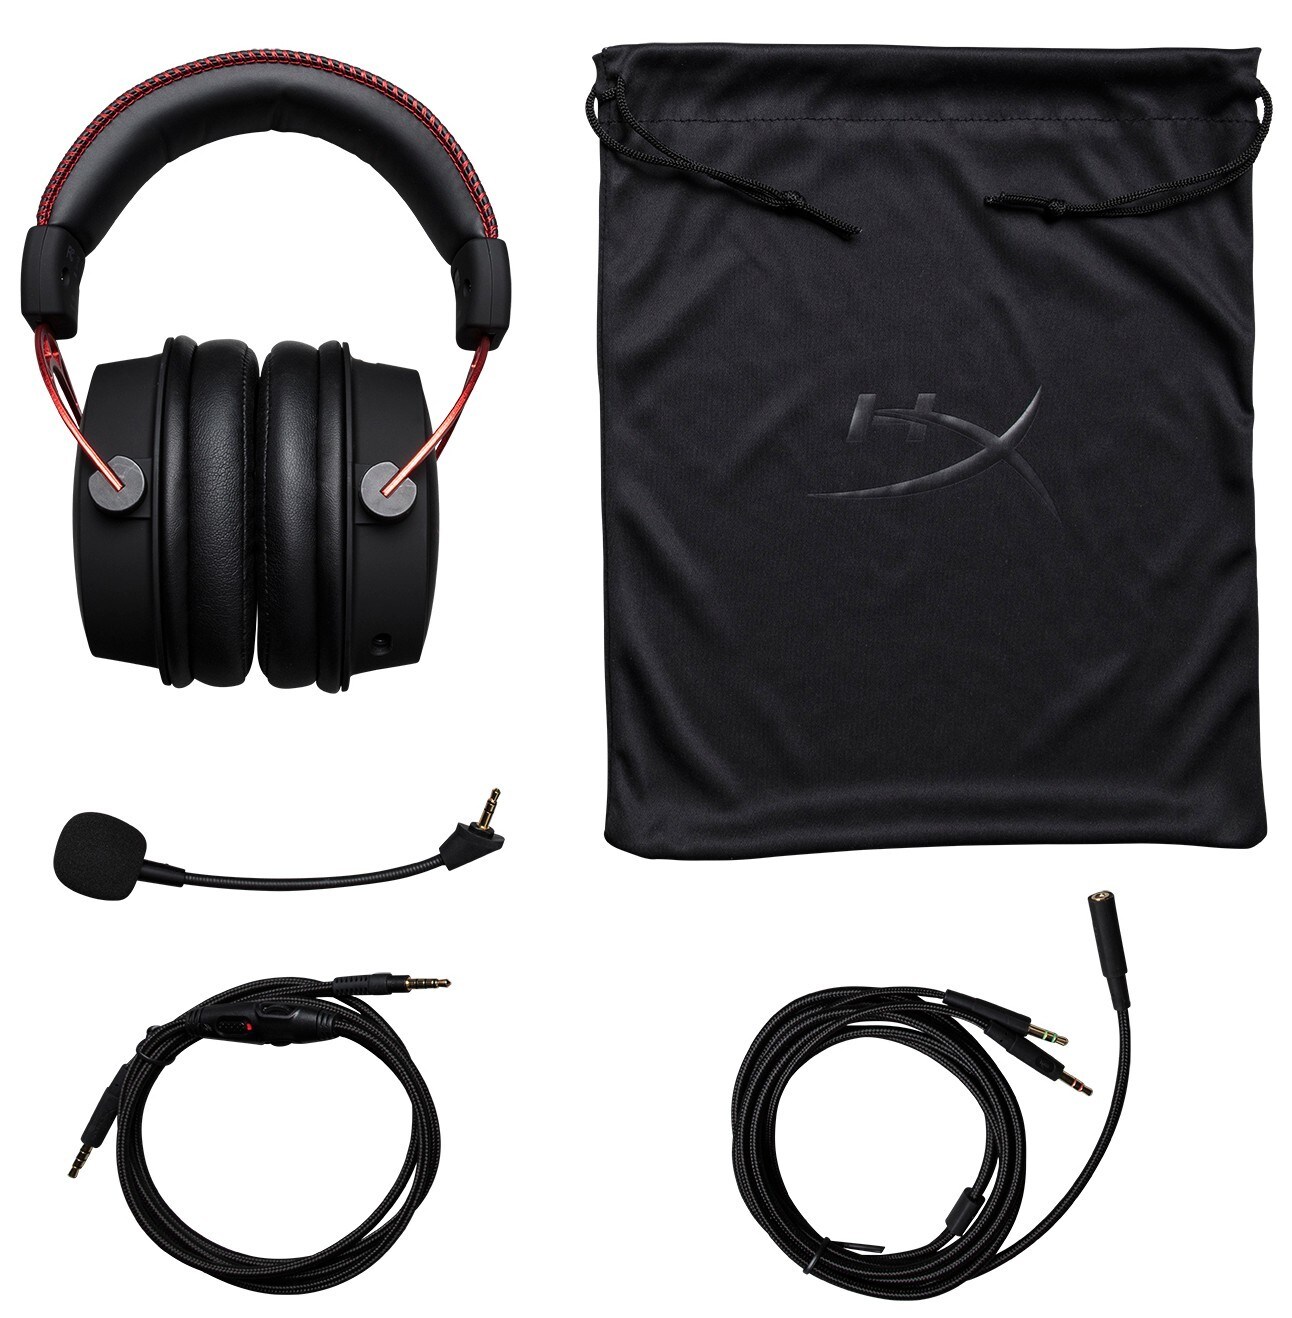 HyperX Cloud Alpha Review | Trusted Reviews